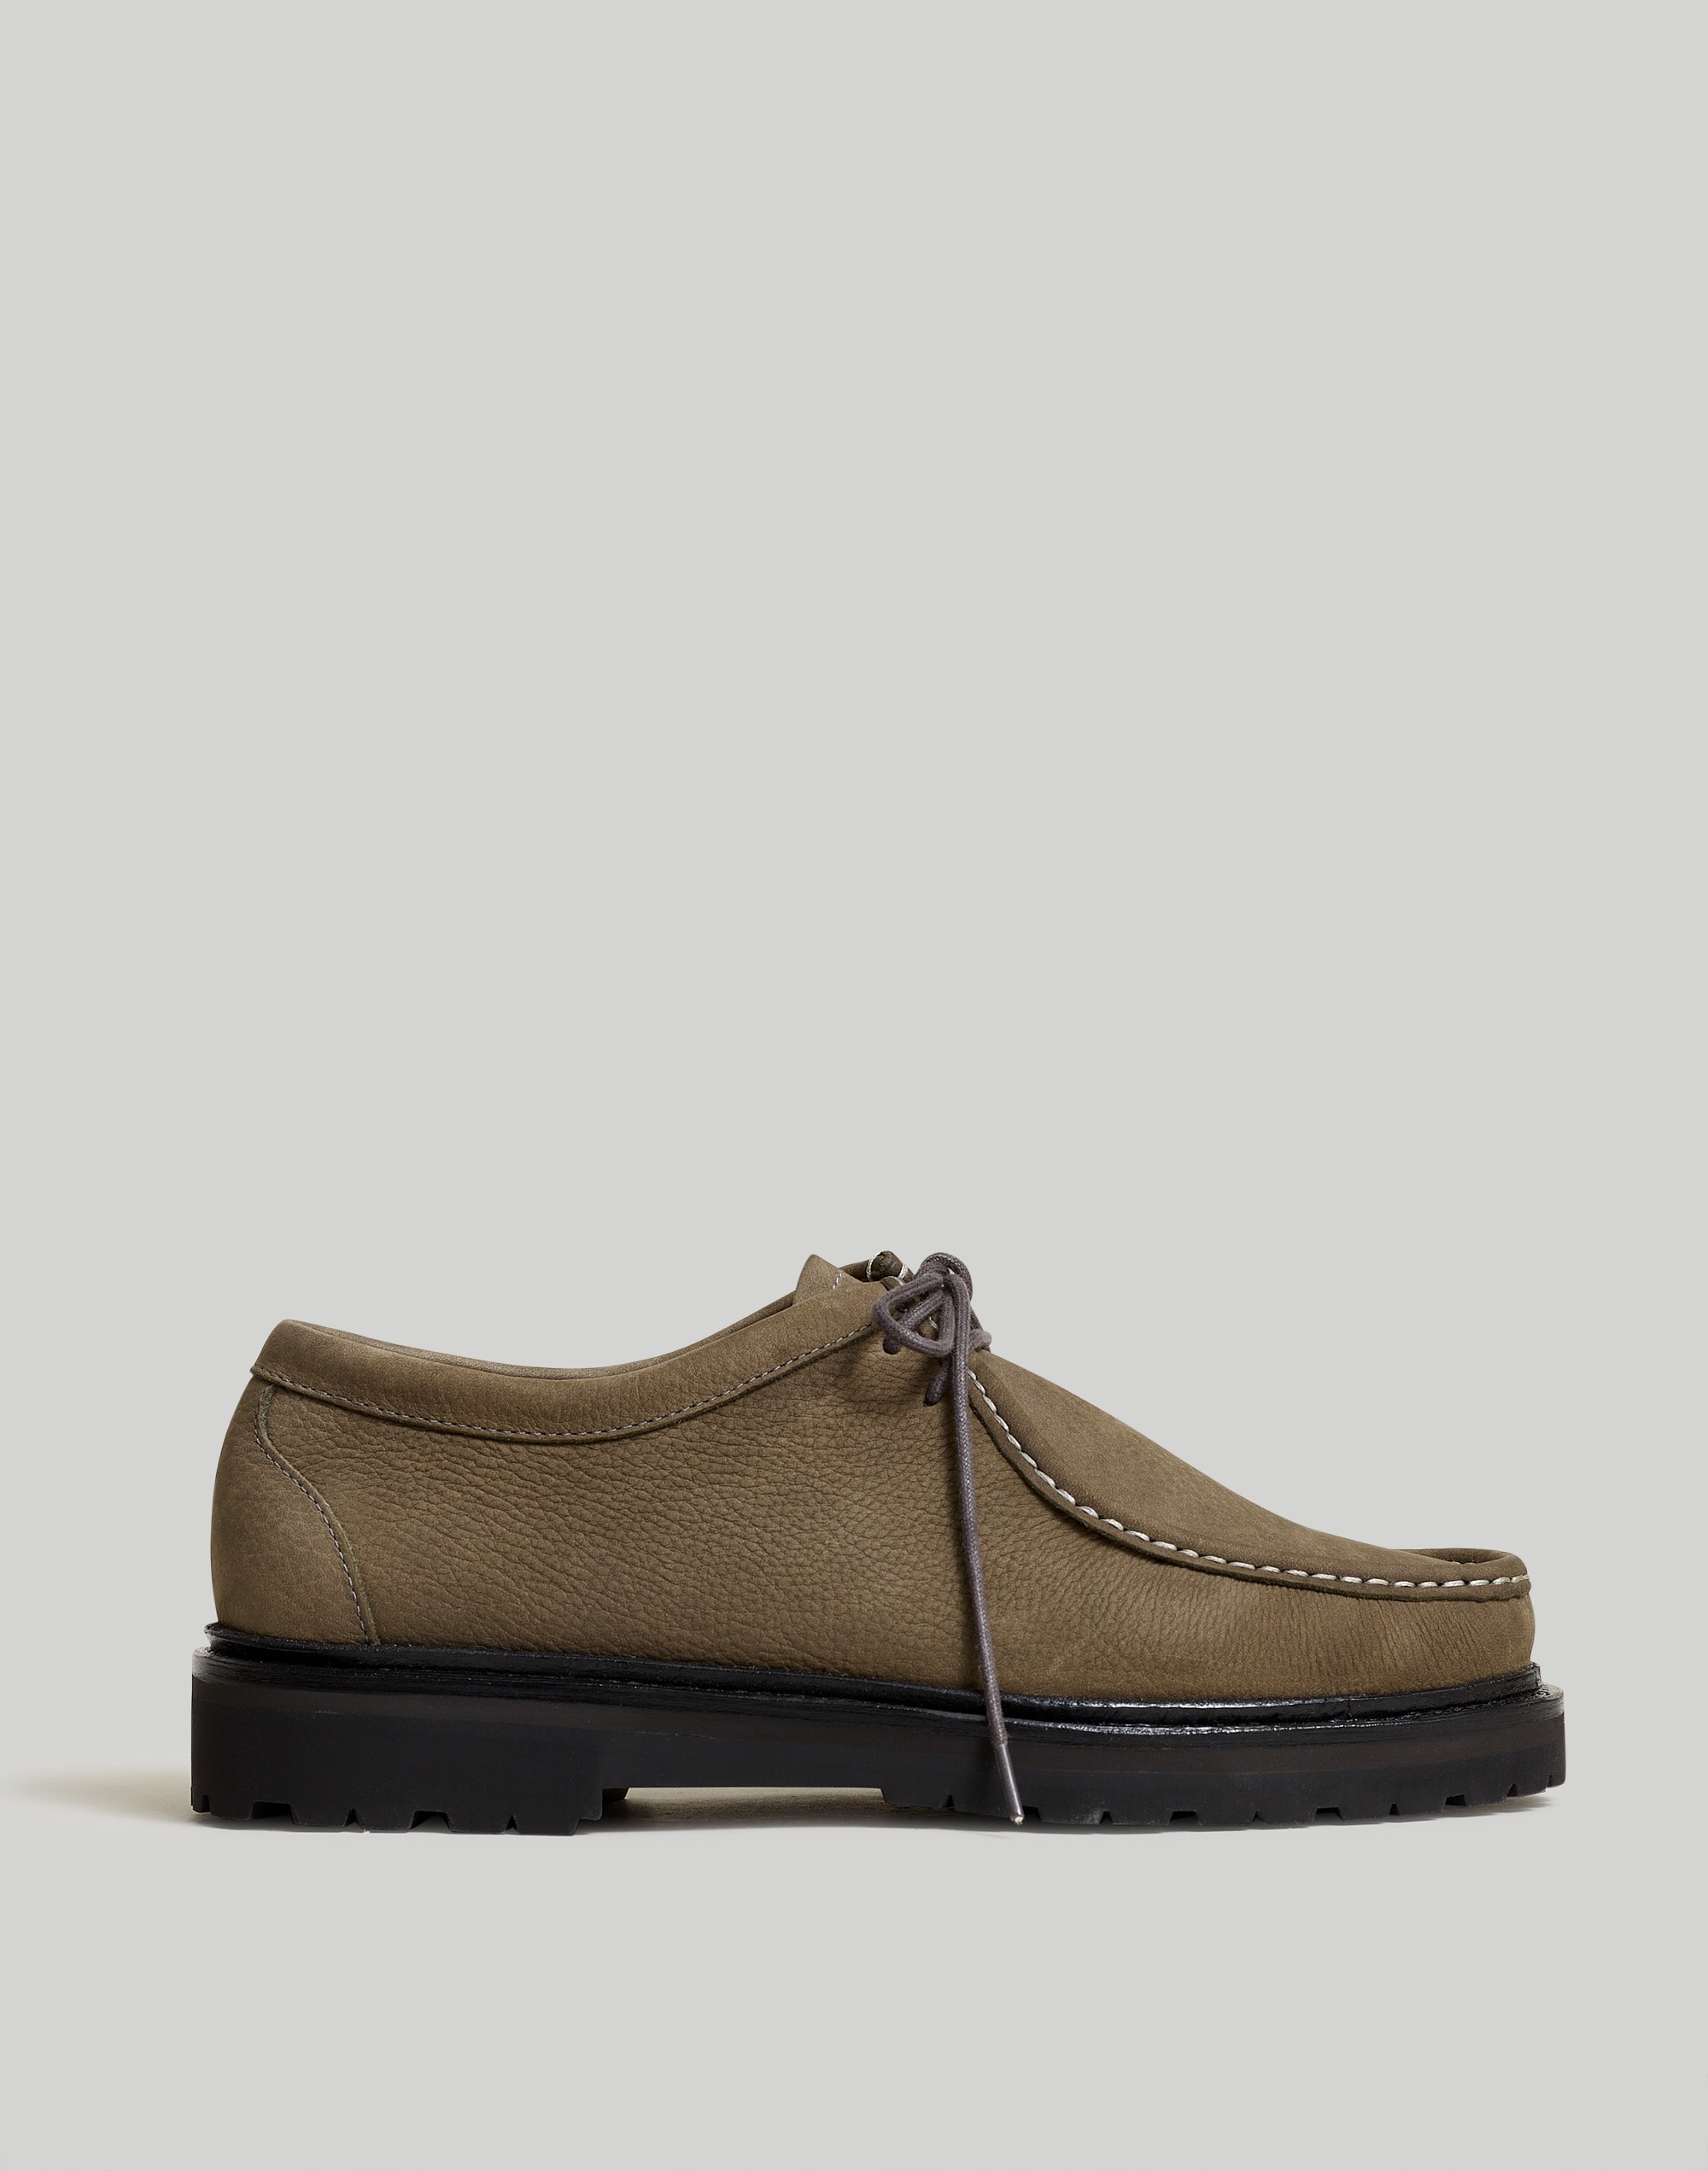 Madewell x G.H.BASS Wallace Leather Moc